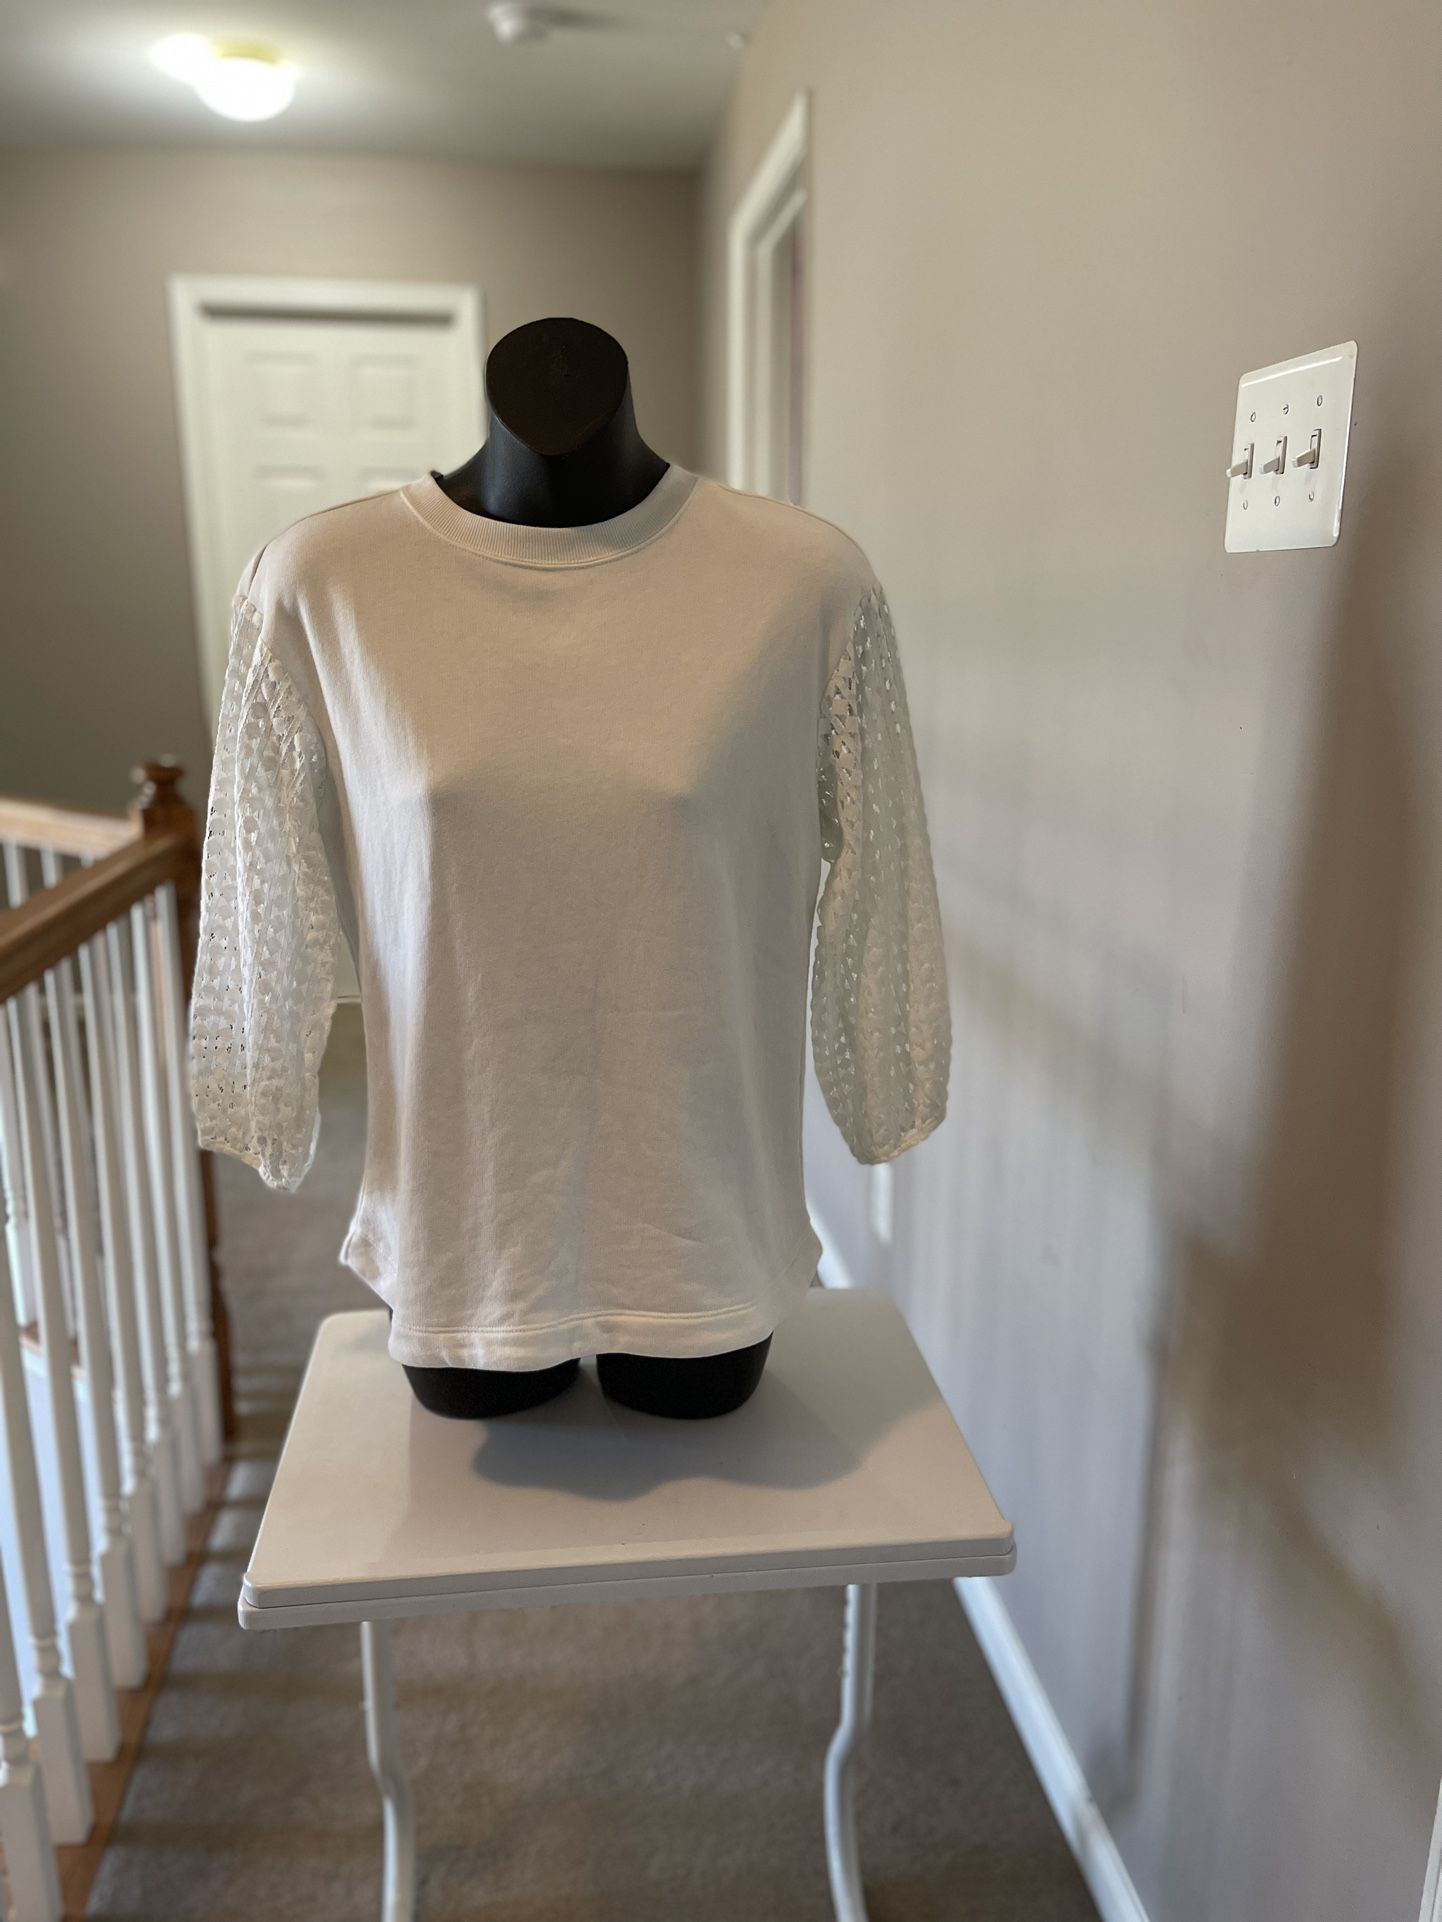 NWOT Sweater size XS in White from Banana Republic with beautiful 3/4 length  detailed sleeves. 